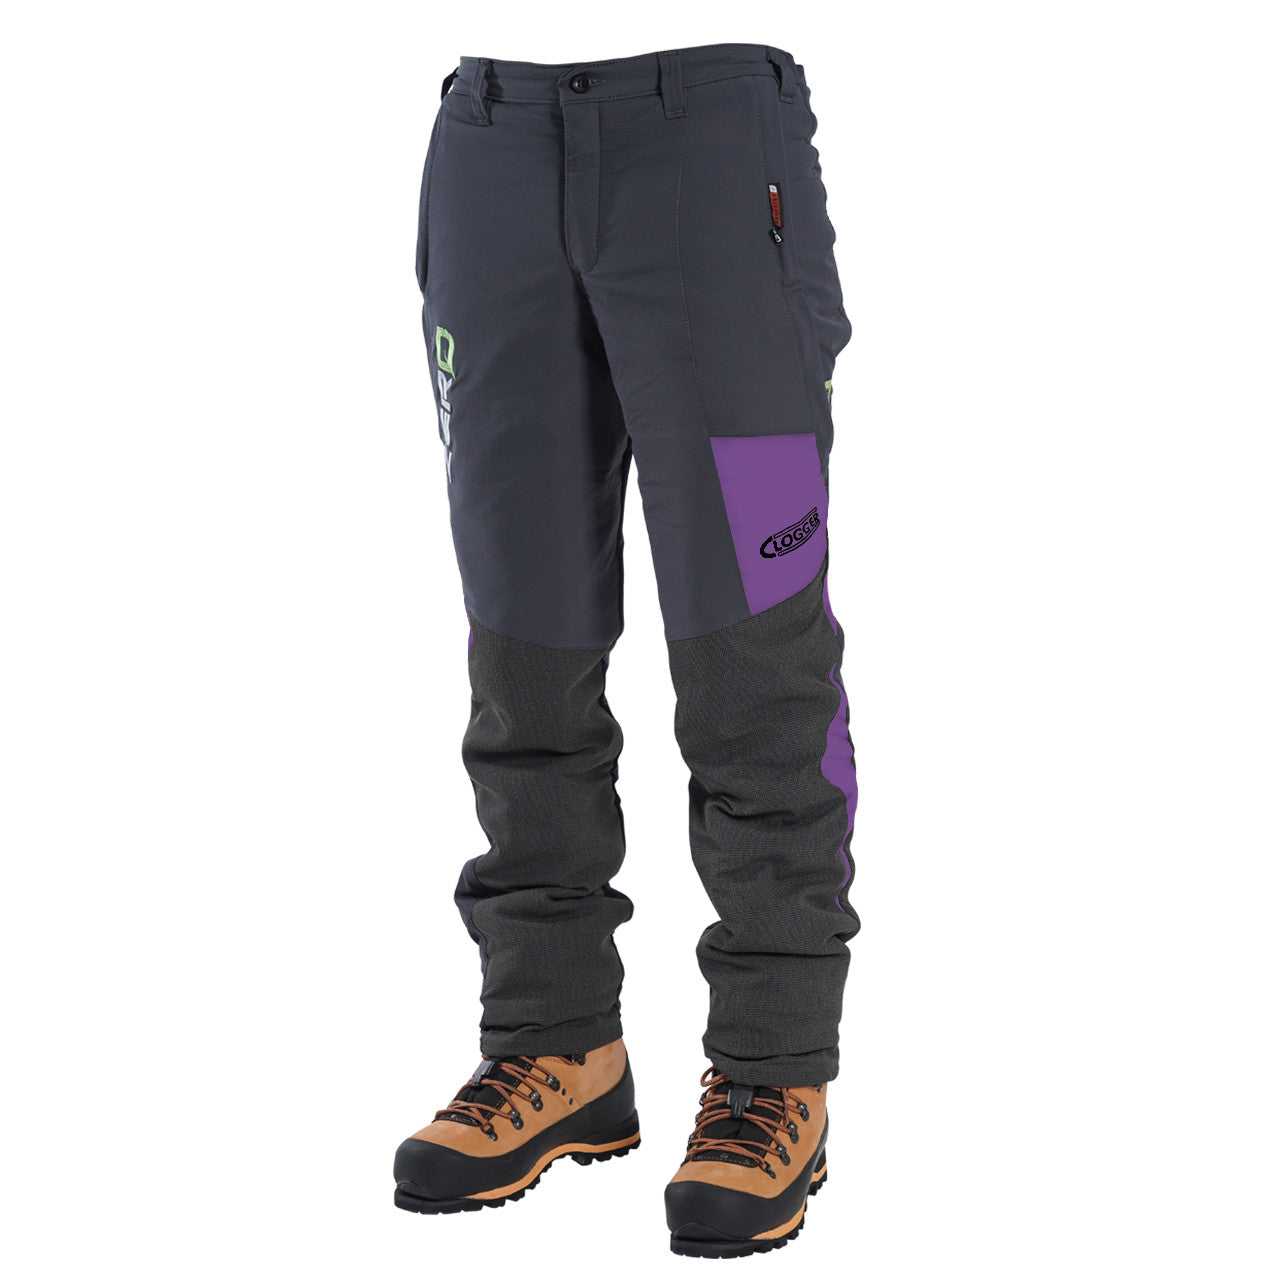 Clogger Zero Gen2 Light and Cool Men's Chainsaw Trousers TU71Z